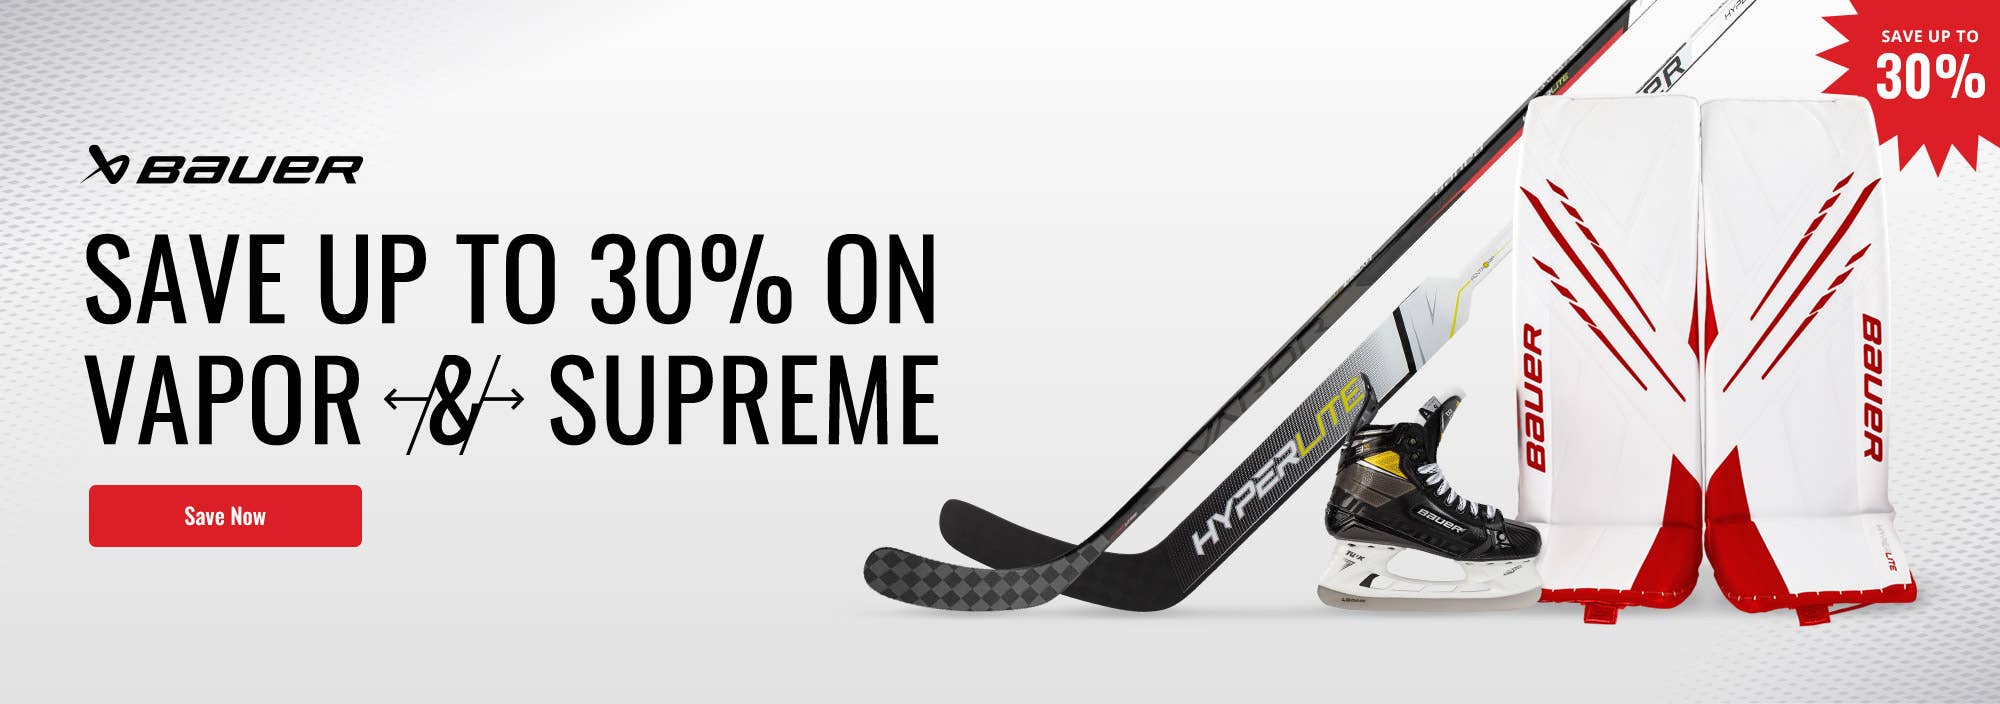 Bauer Price Reductions: Save up to 30% on Vapor & Supreme